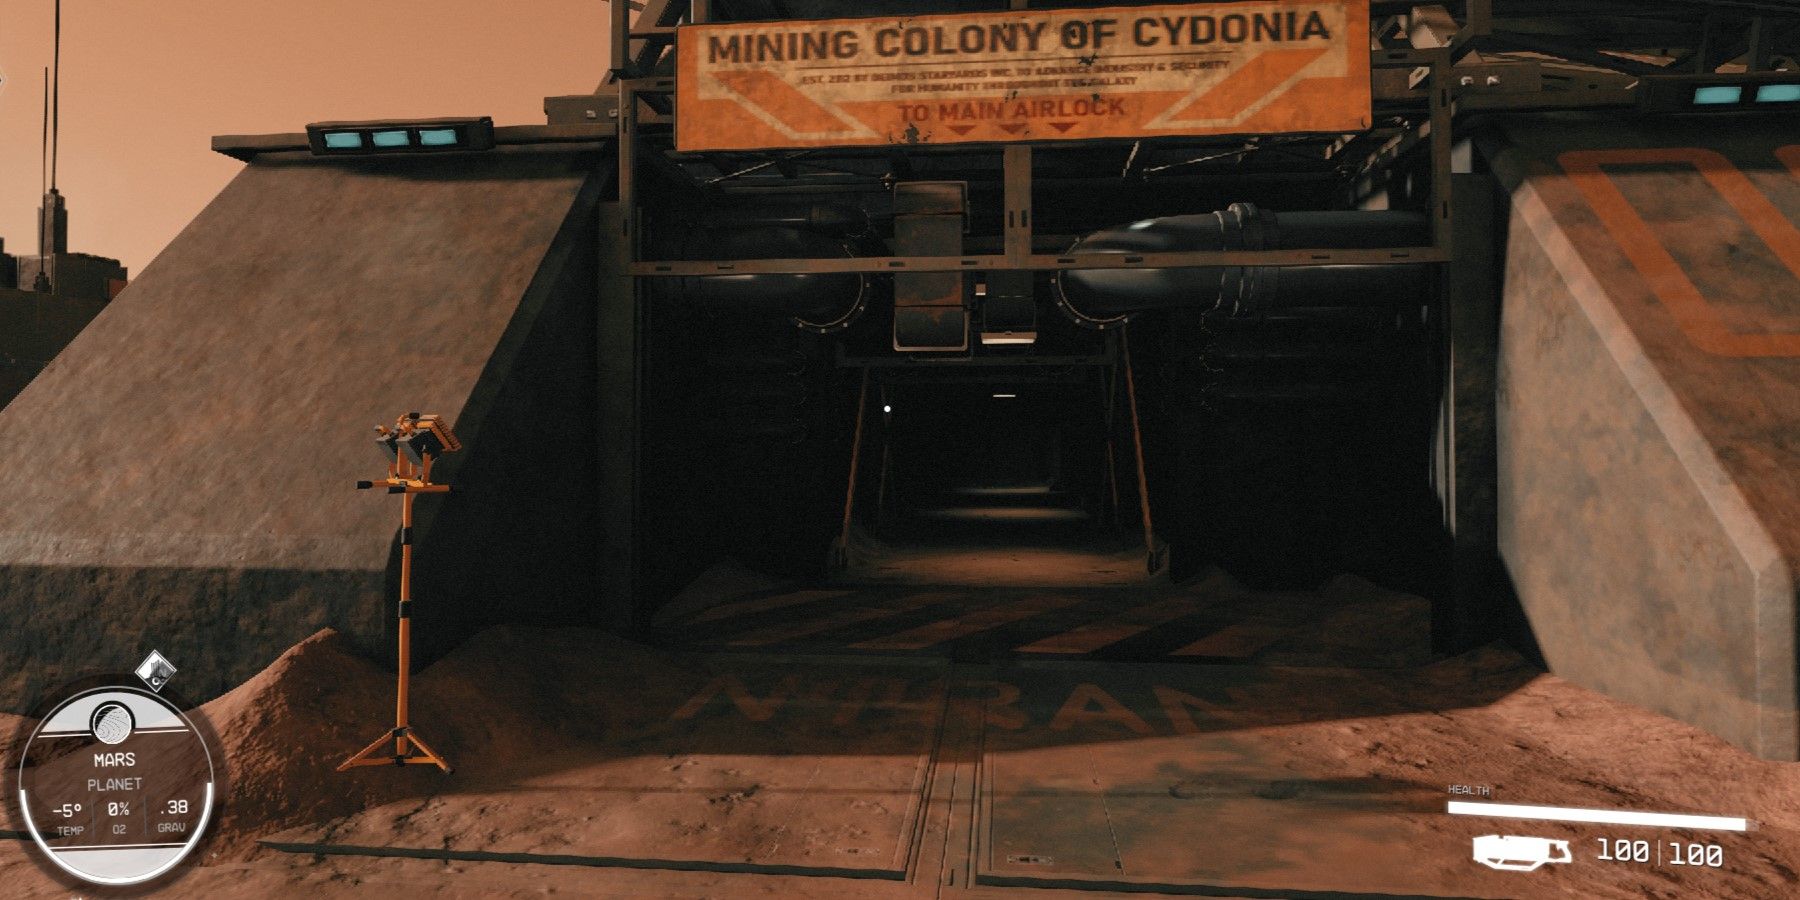 The Starfield character is about to enter the Mining Cydonia Colony on Mars.